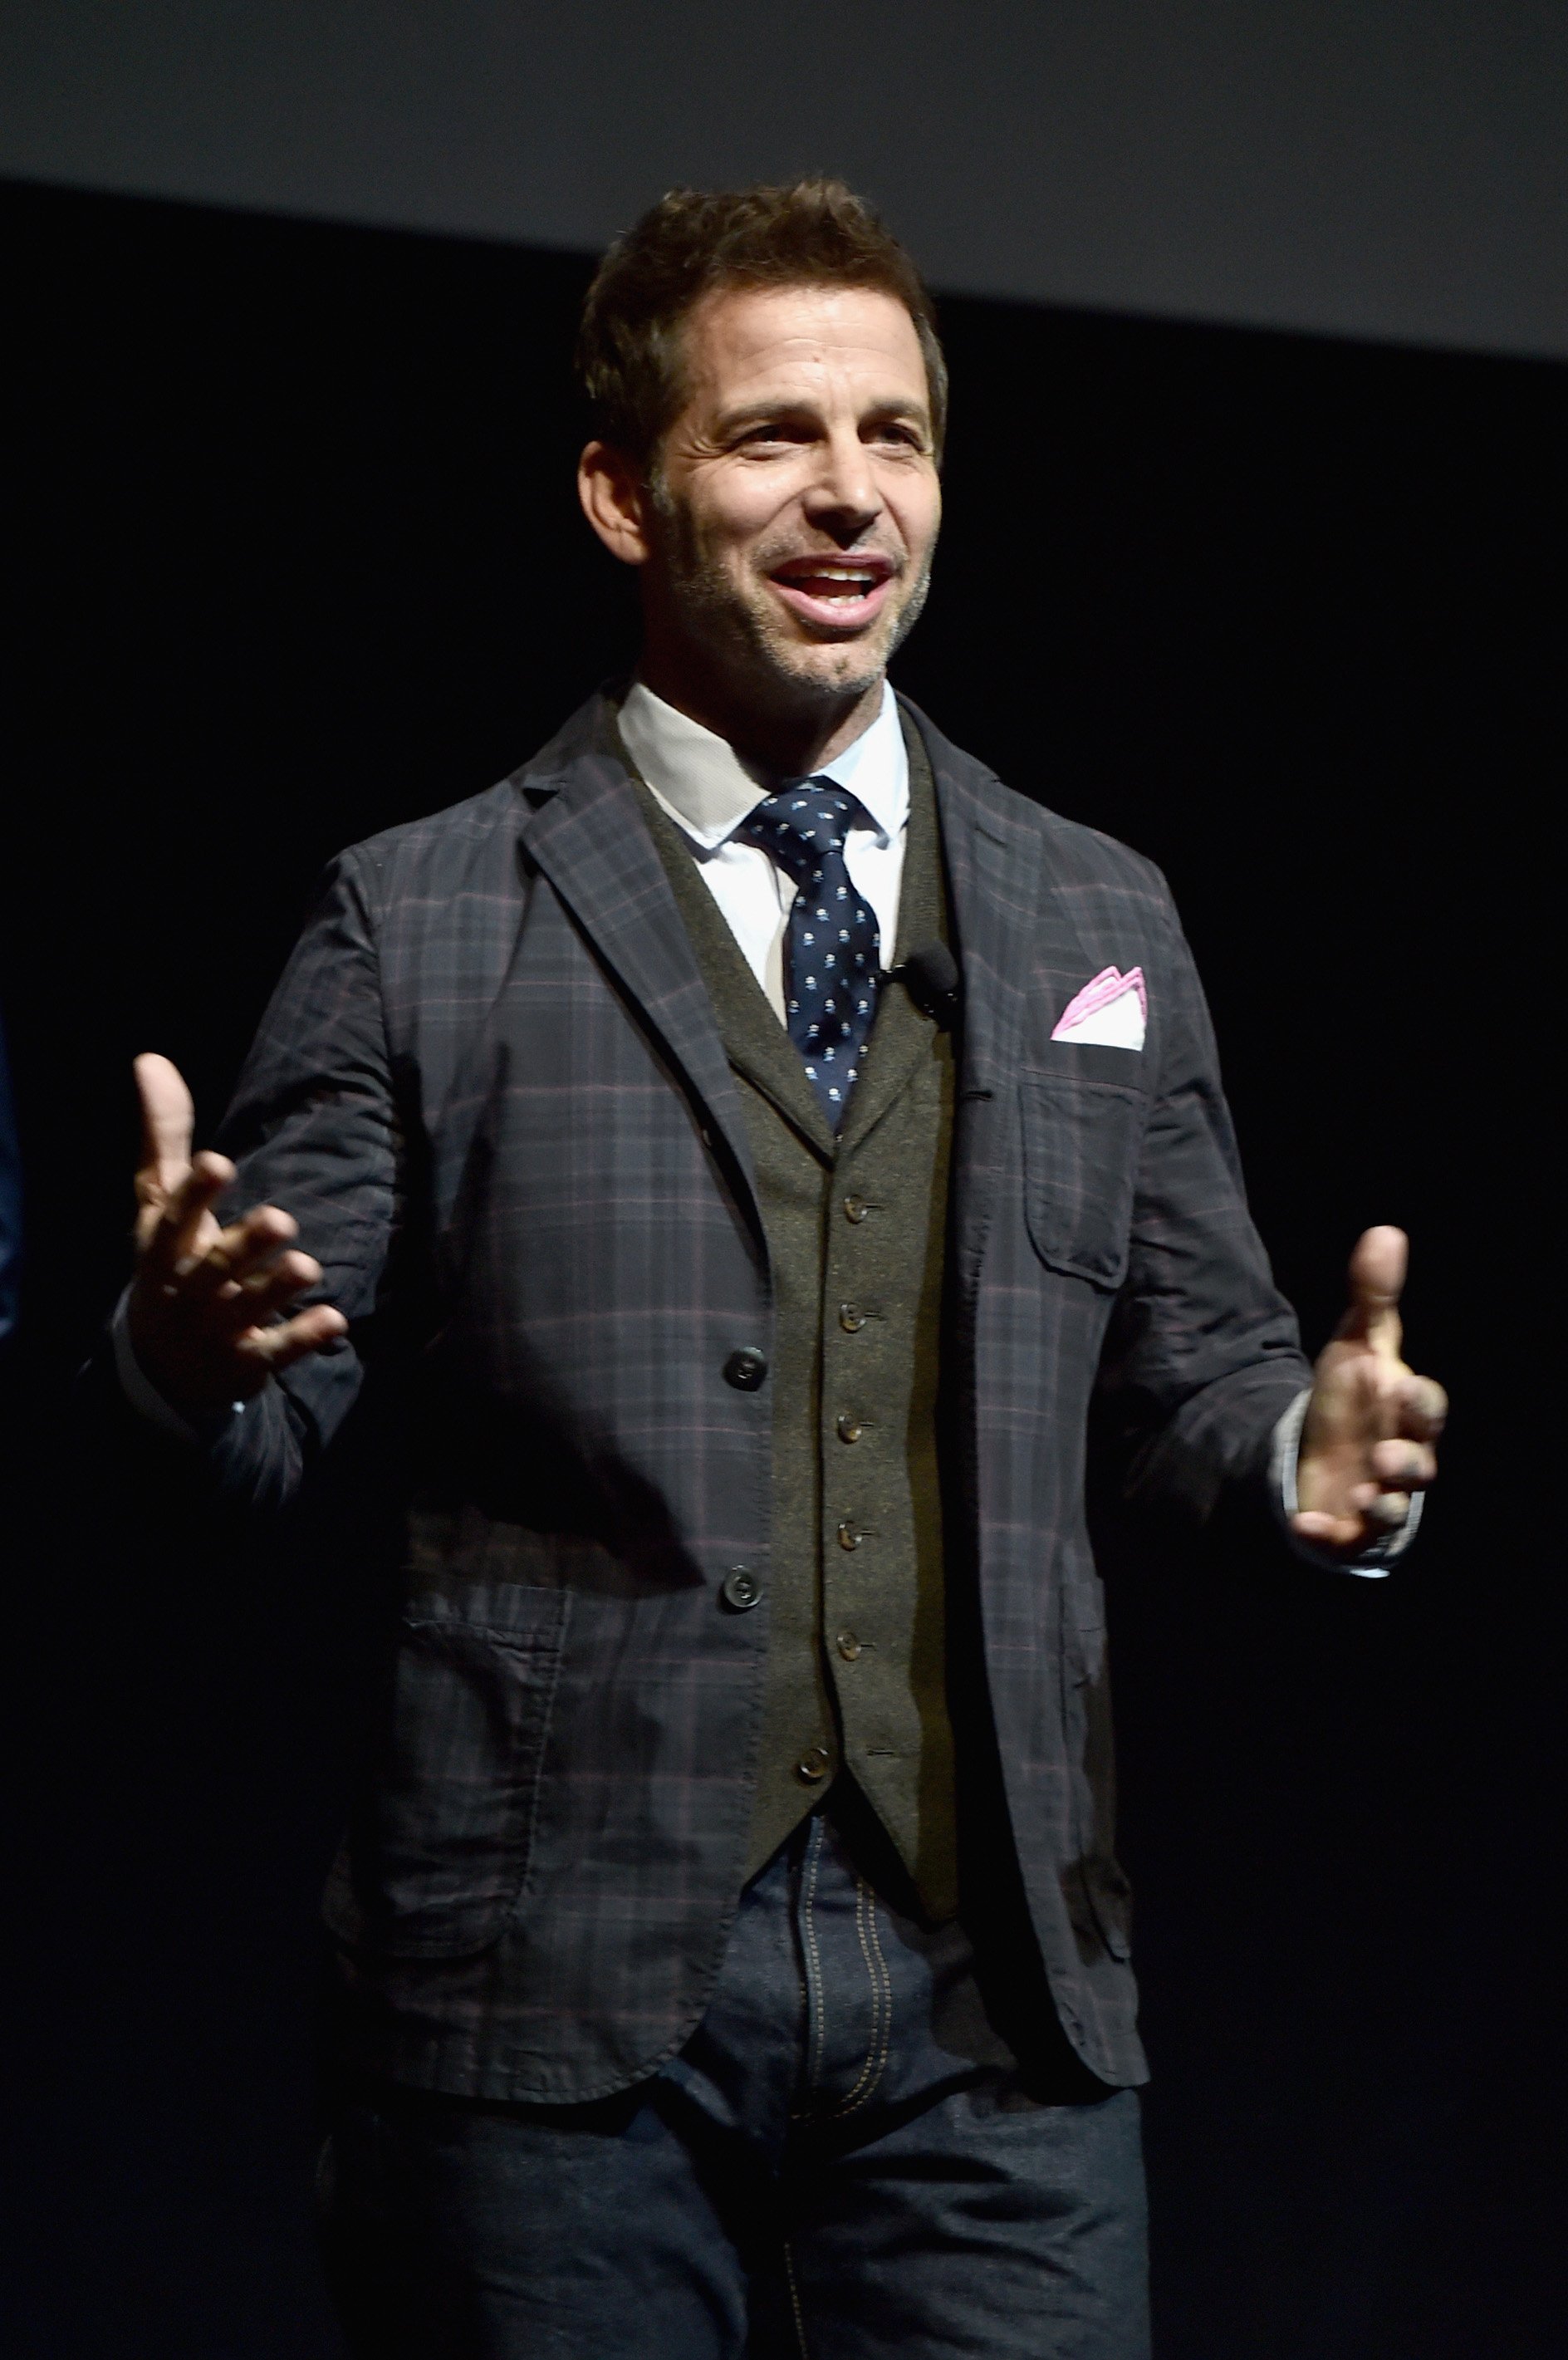 Zack Snyder in Las Vegas, Nevada on March 29, 2017 | Source: Getty Images